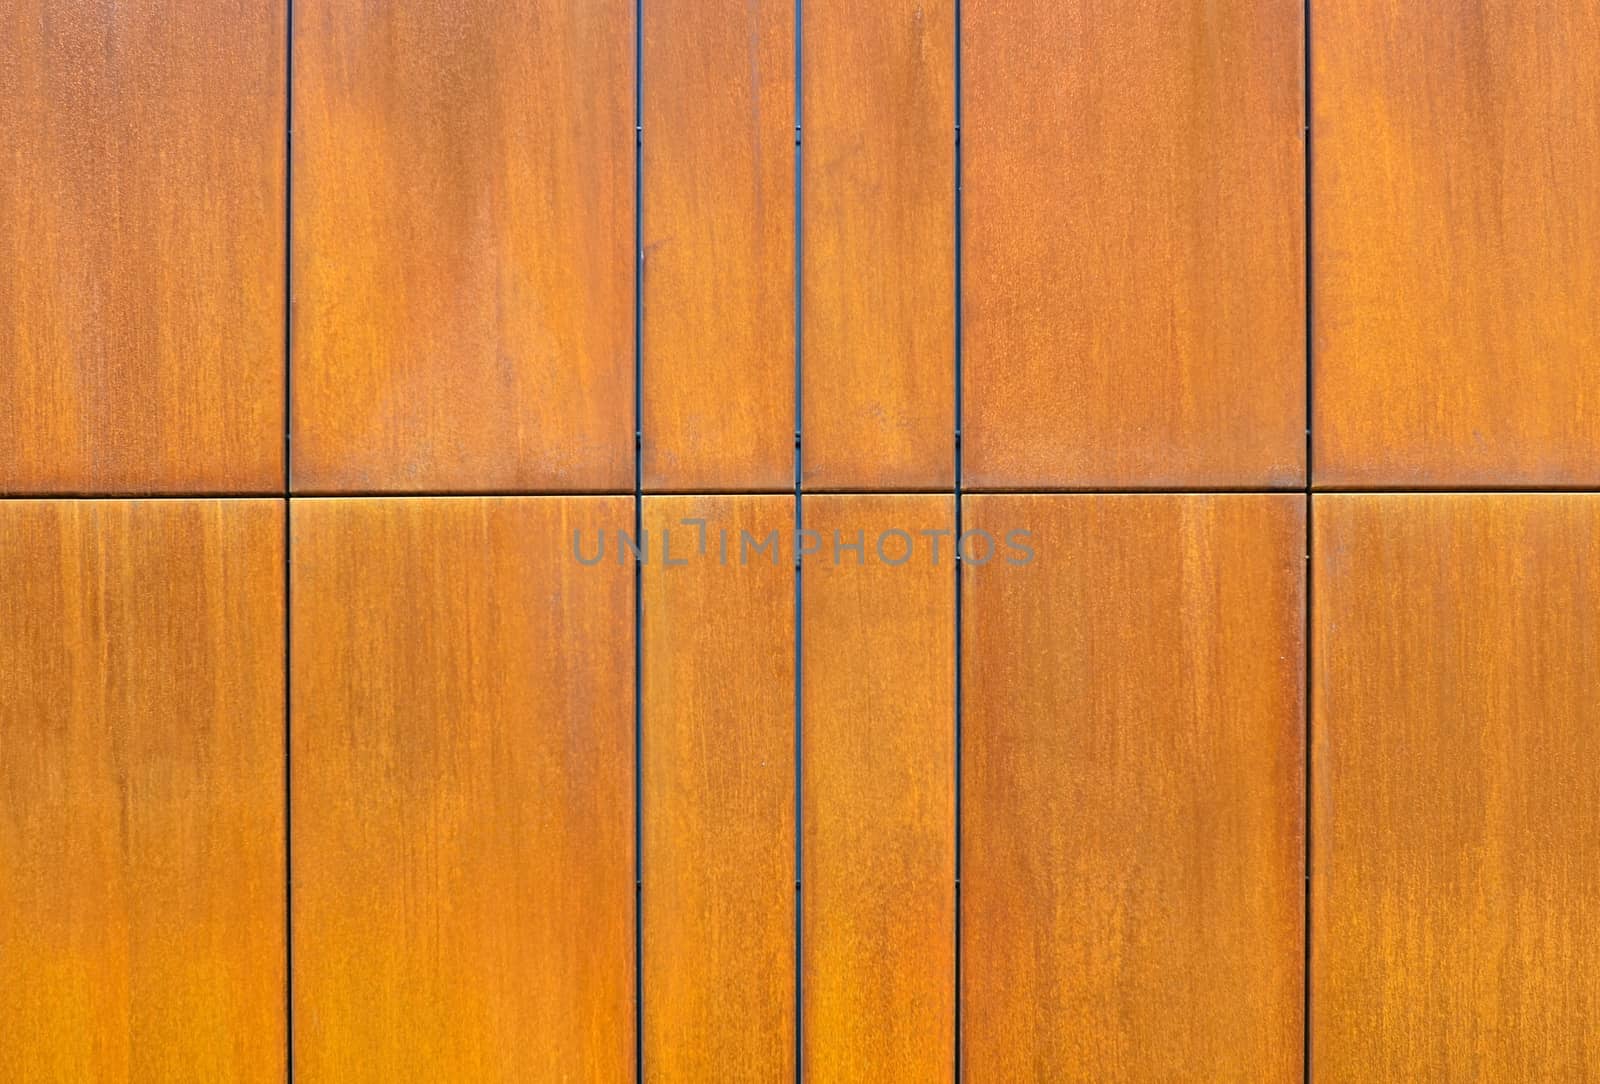 Rusty iron plates. Architecture exterior detail of the modern building.